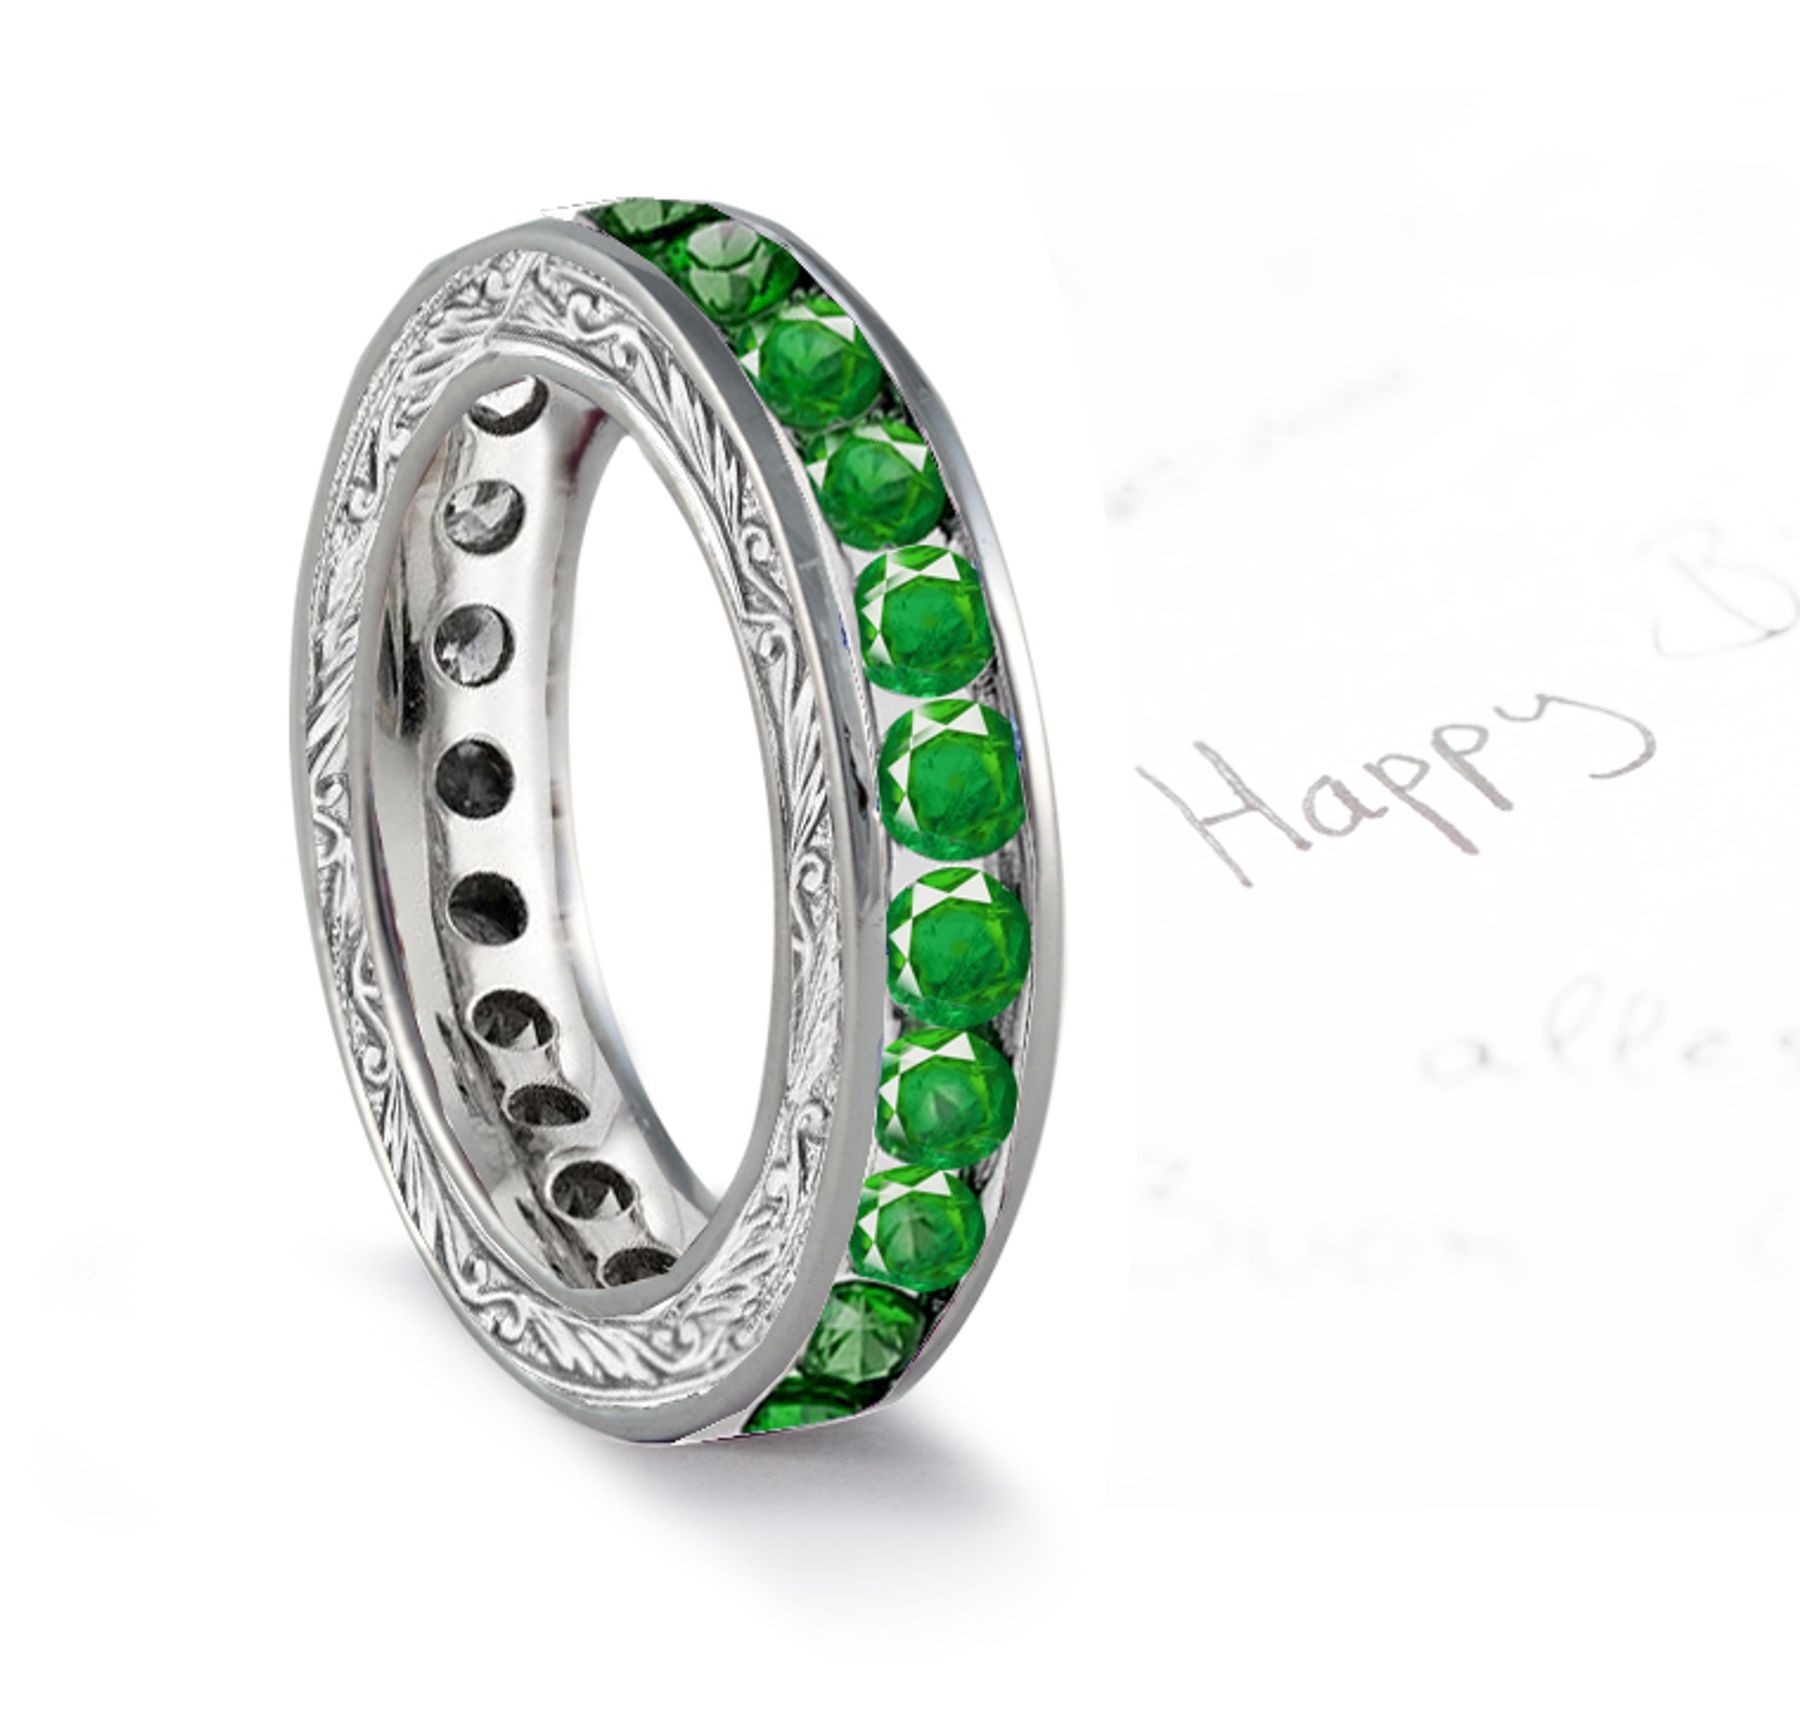 Pleasurable Sensations: NEW PRODUCT!Antique Full Emerald & Platinum Band with Foliate Scrolls & Motifs Made To Order